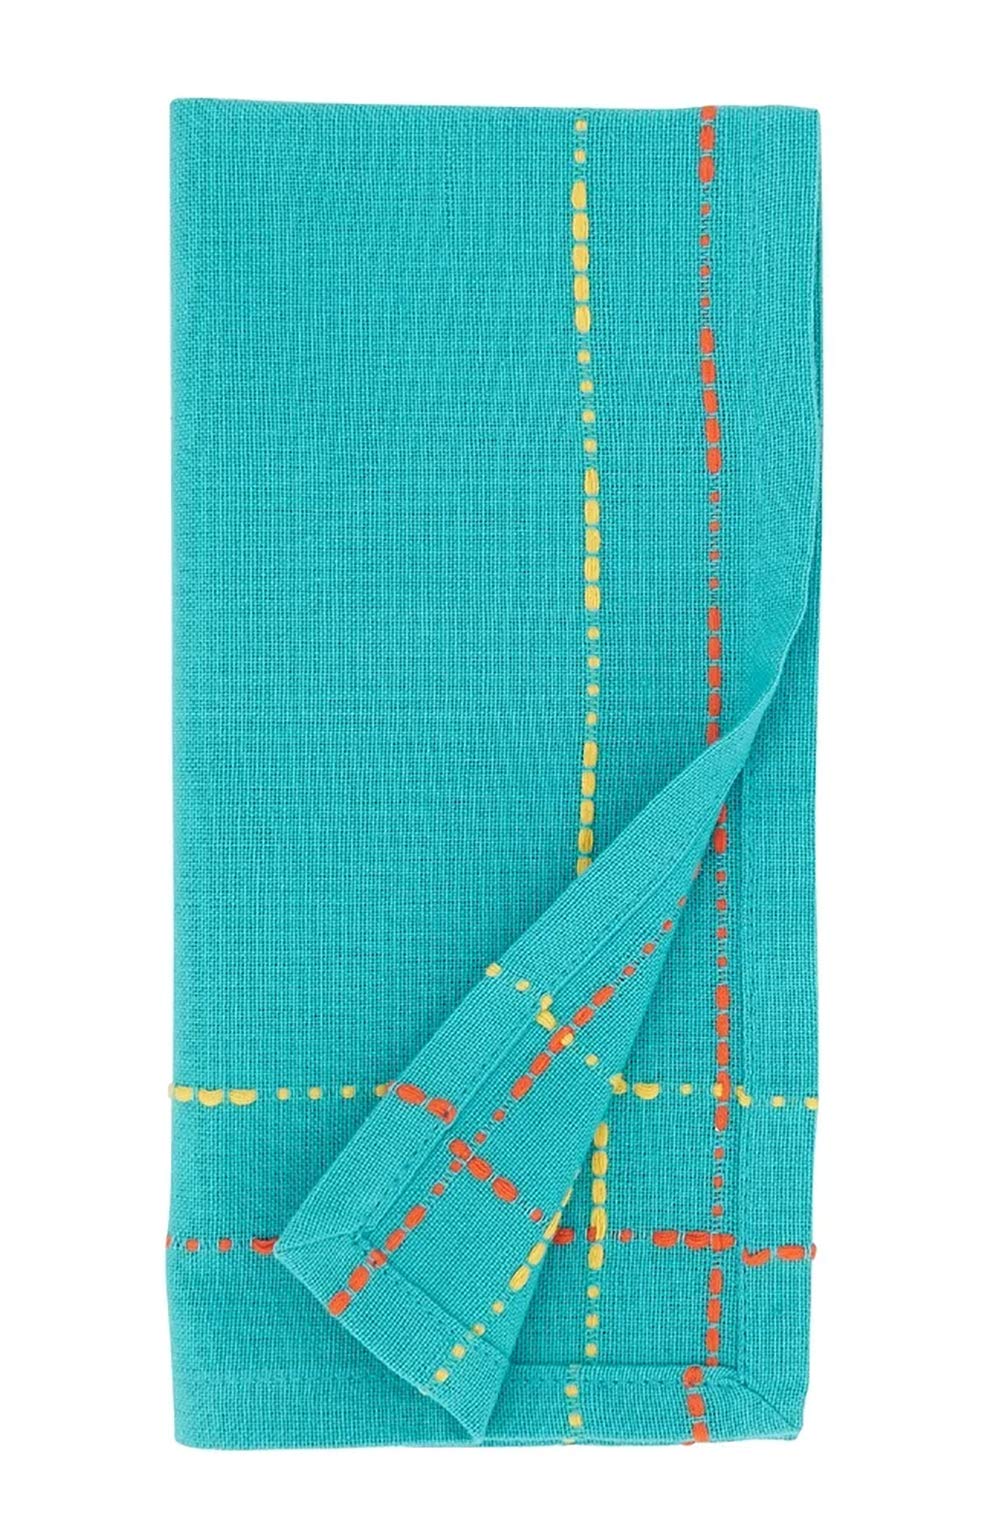 Fennco Styles Dobby Border Woven Cotton Cloth Napkins 18" W x 18" L, Set of 4 - Turquoise Dinner Napkins for Dining Table Décor, Family Gathering, Banquets, and Special Events